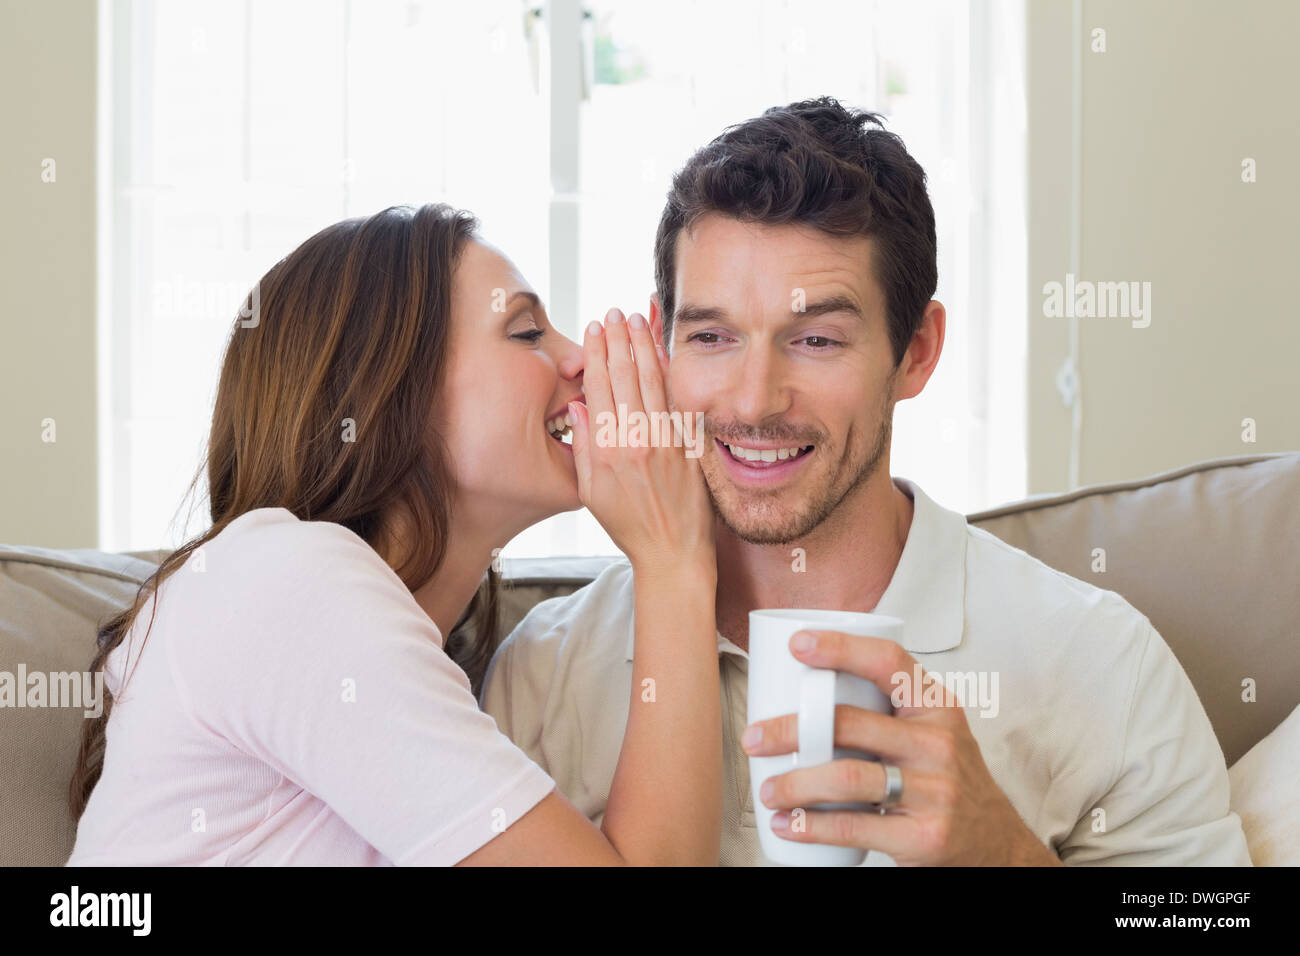 Woman whispering secret into a happy mans ear in living room Stock Photo